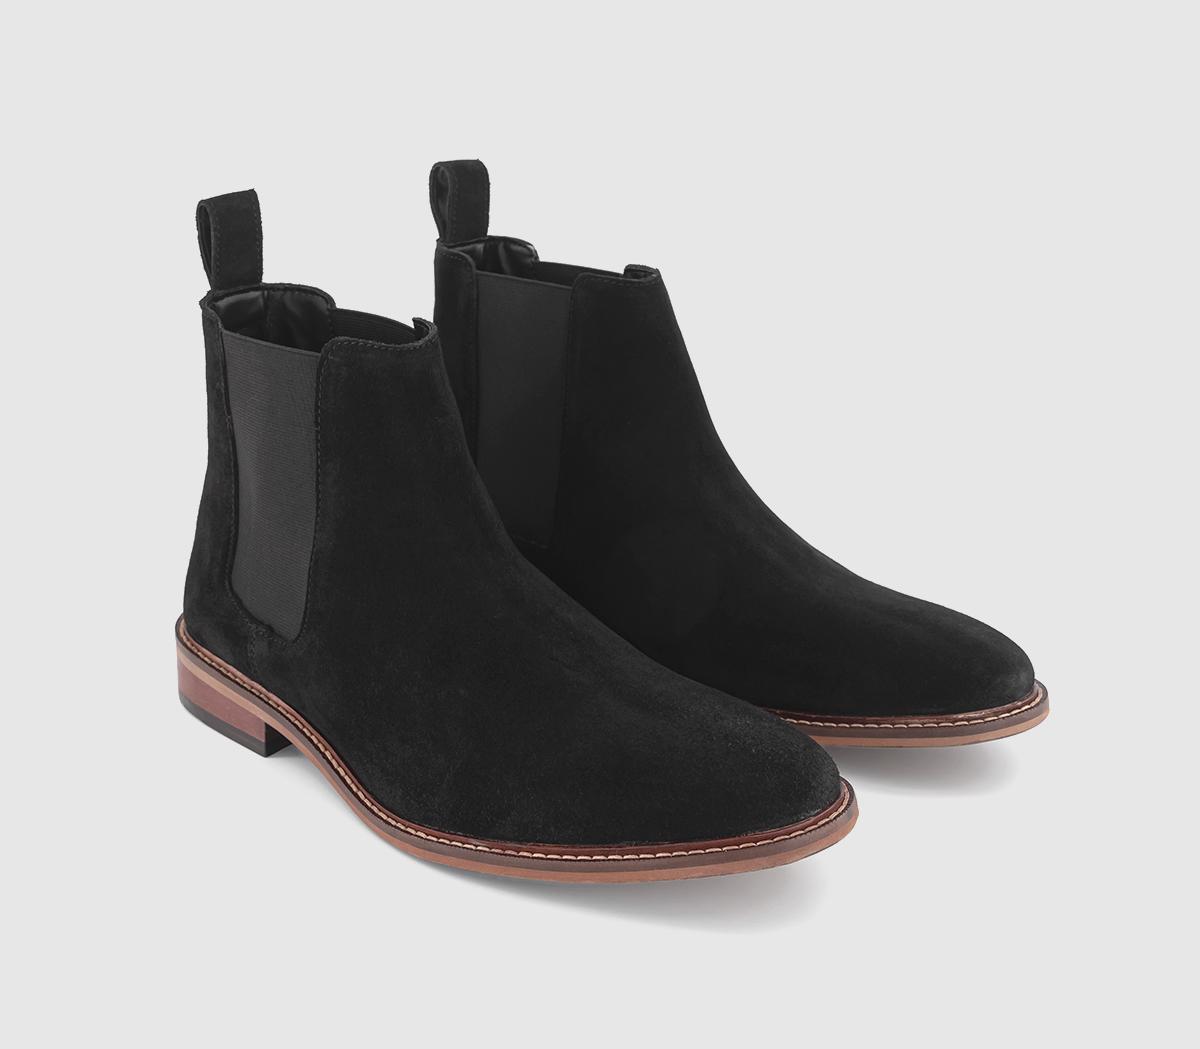 OFFICE Mens Beacon Chelsea Boots Black Suede, 11